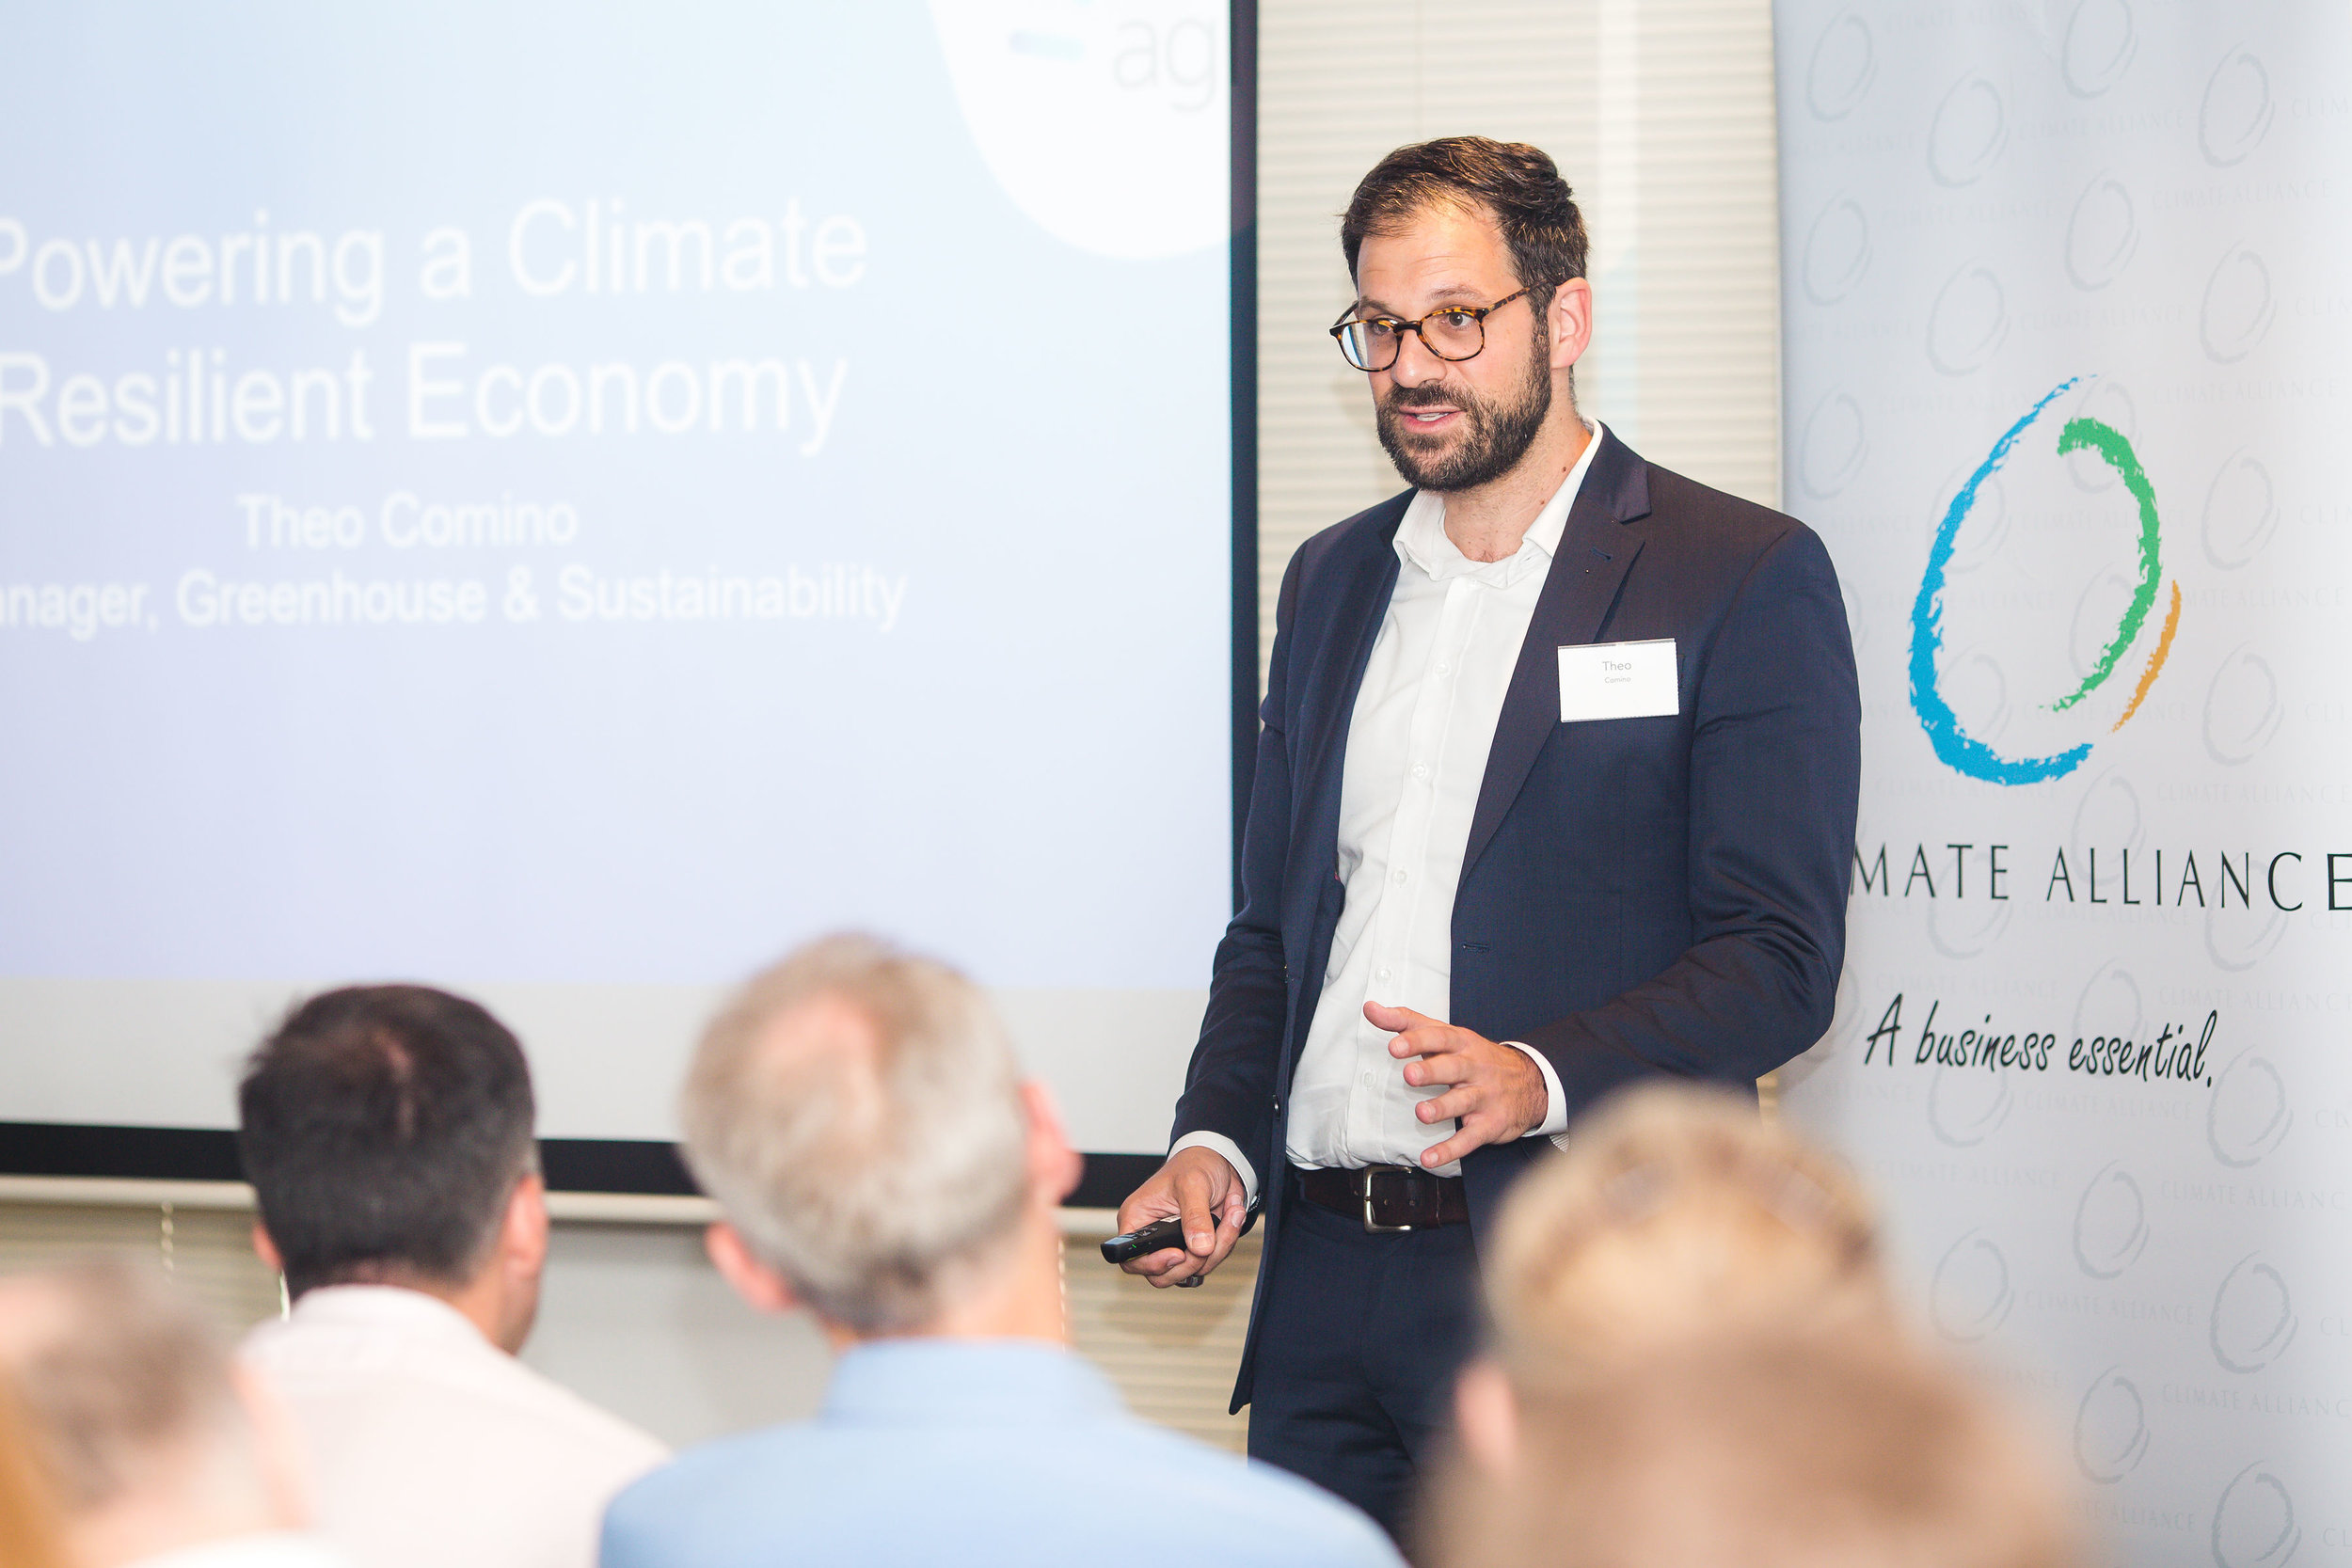  Theo Comino, Manager Greenhouse and Sustainability at AGL 